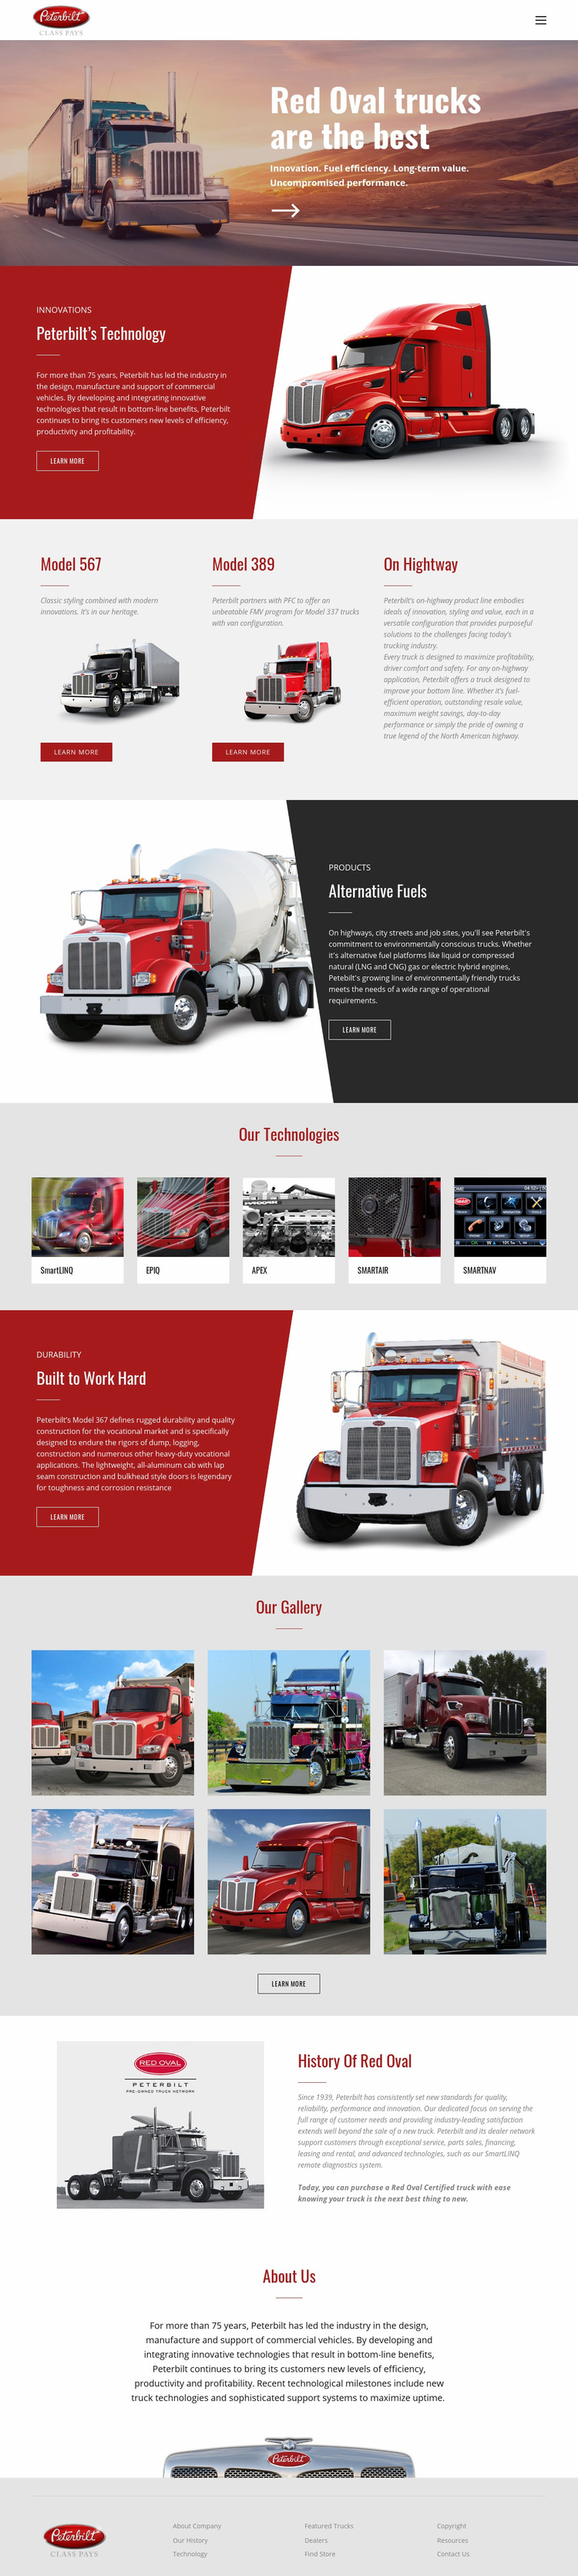 Red oval truck transportaion Web Page Designer